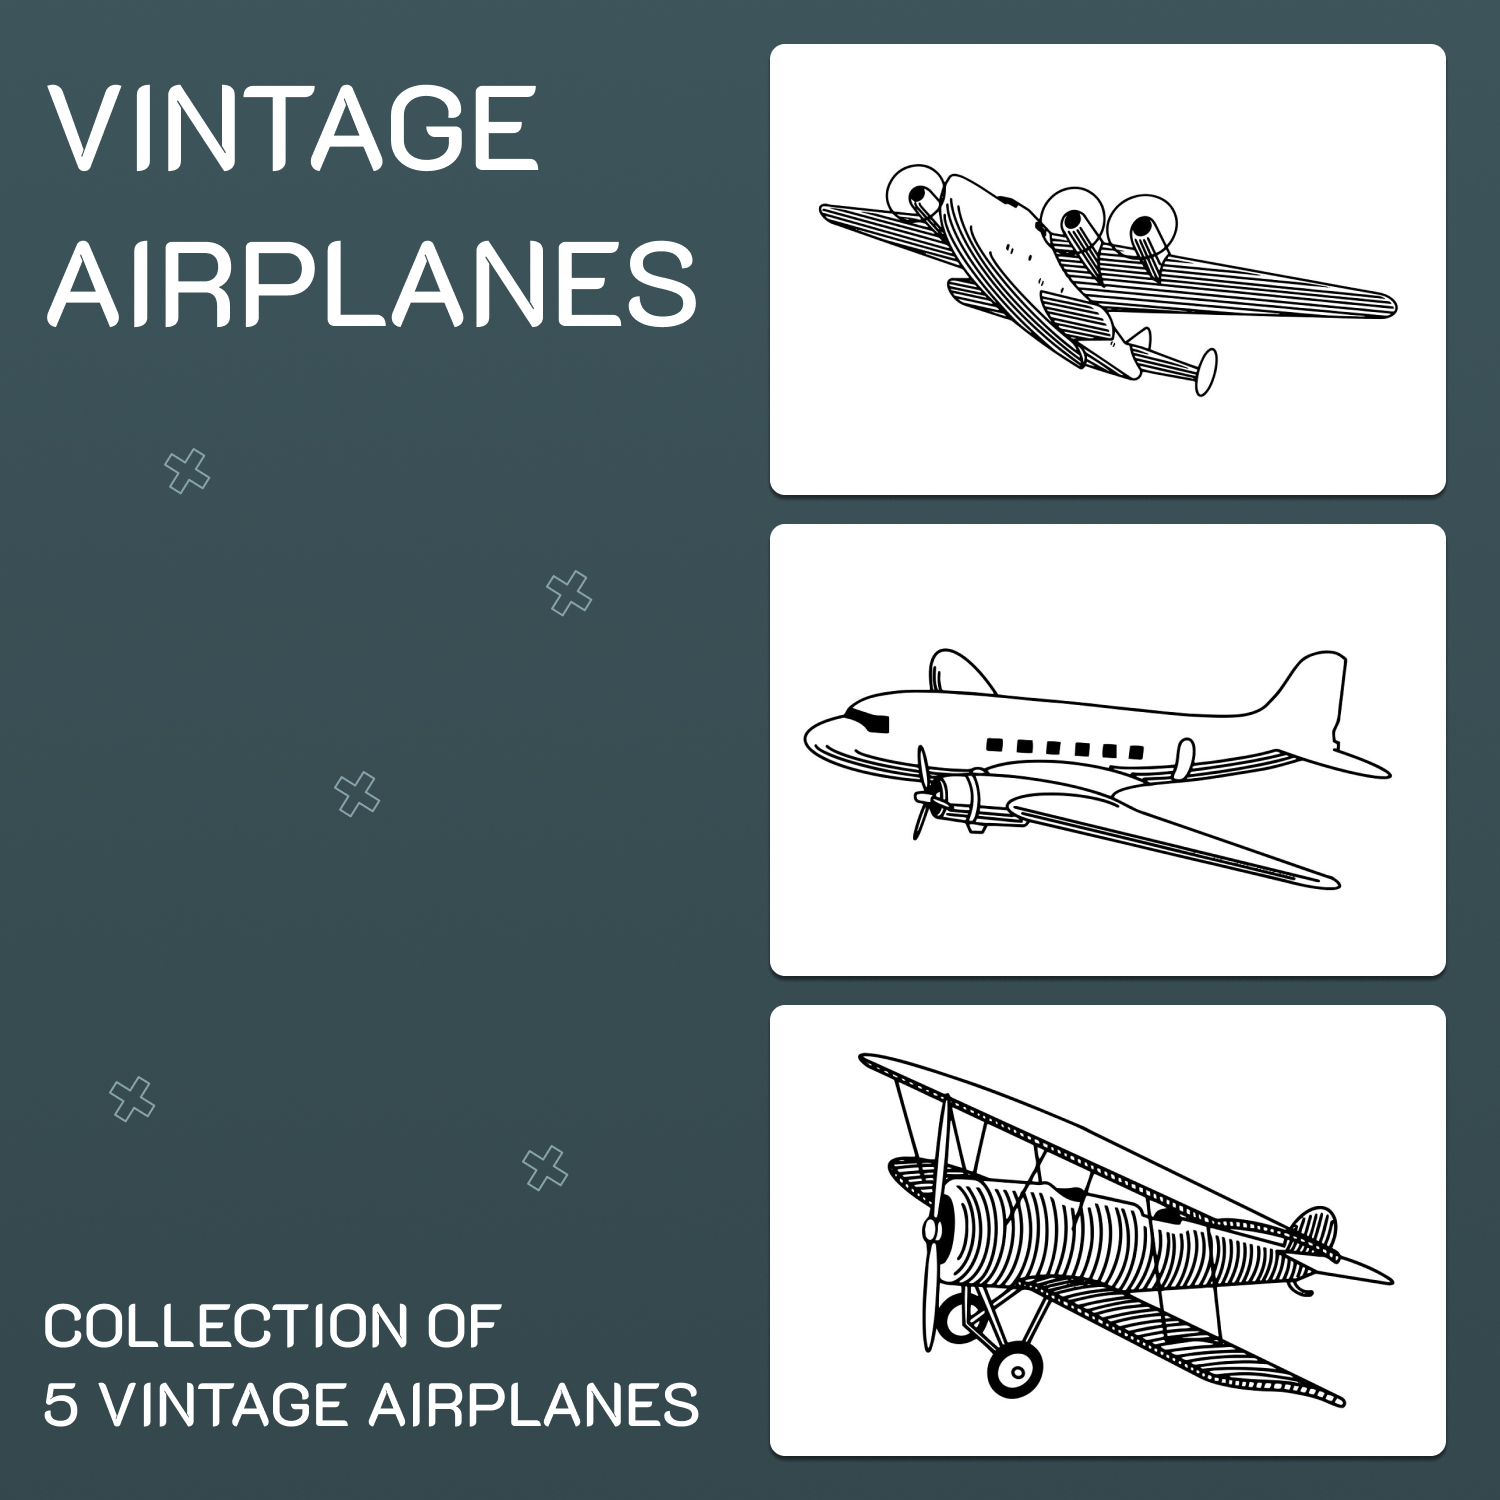 Images with vintage airplanes.